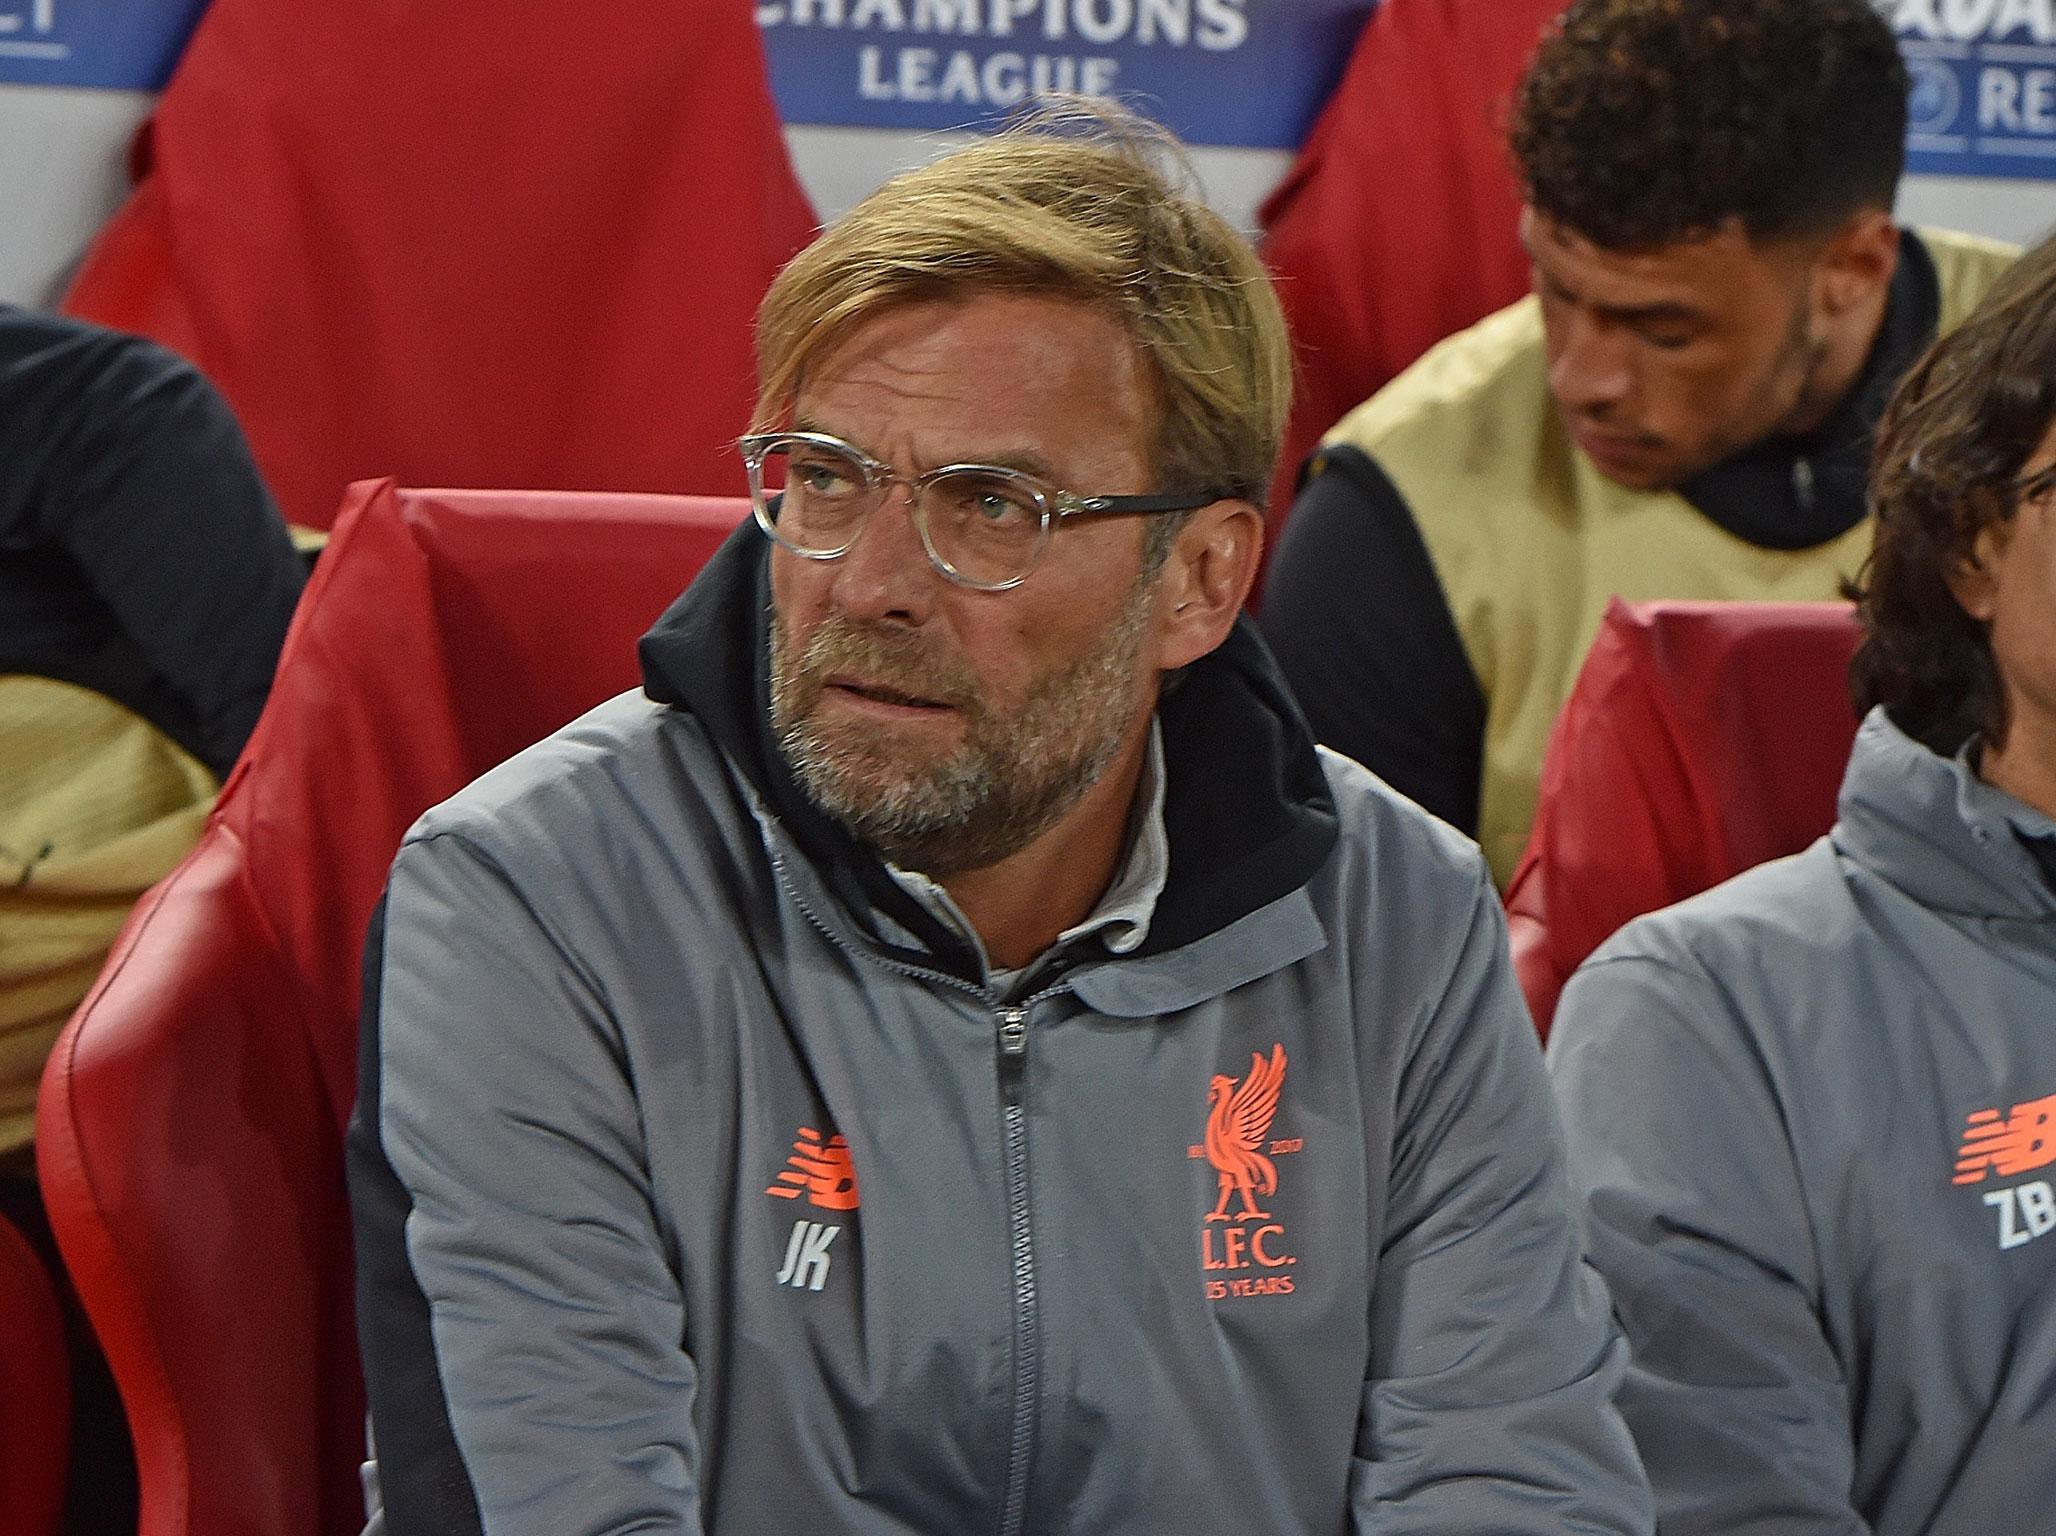 Jurgen Klopp must address Liverpool's defensive frailties or his time at Anfield will end in failure